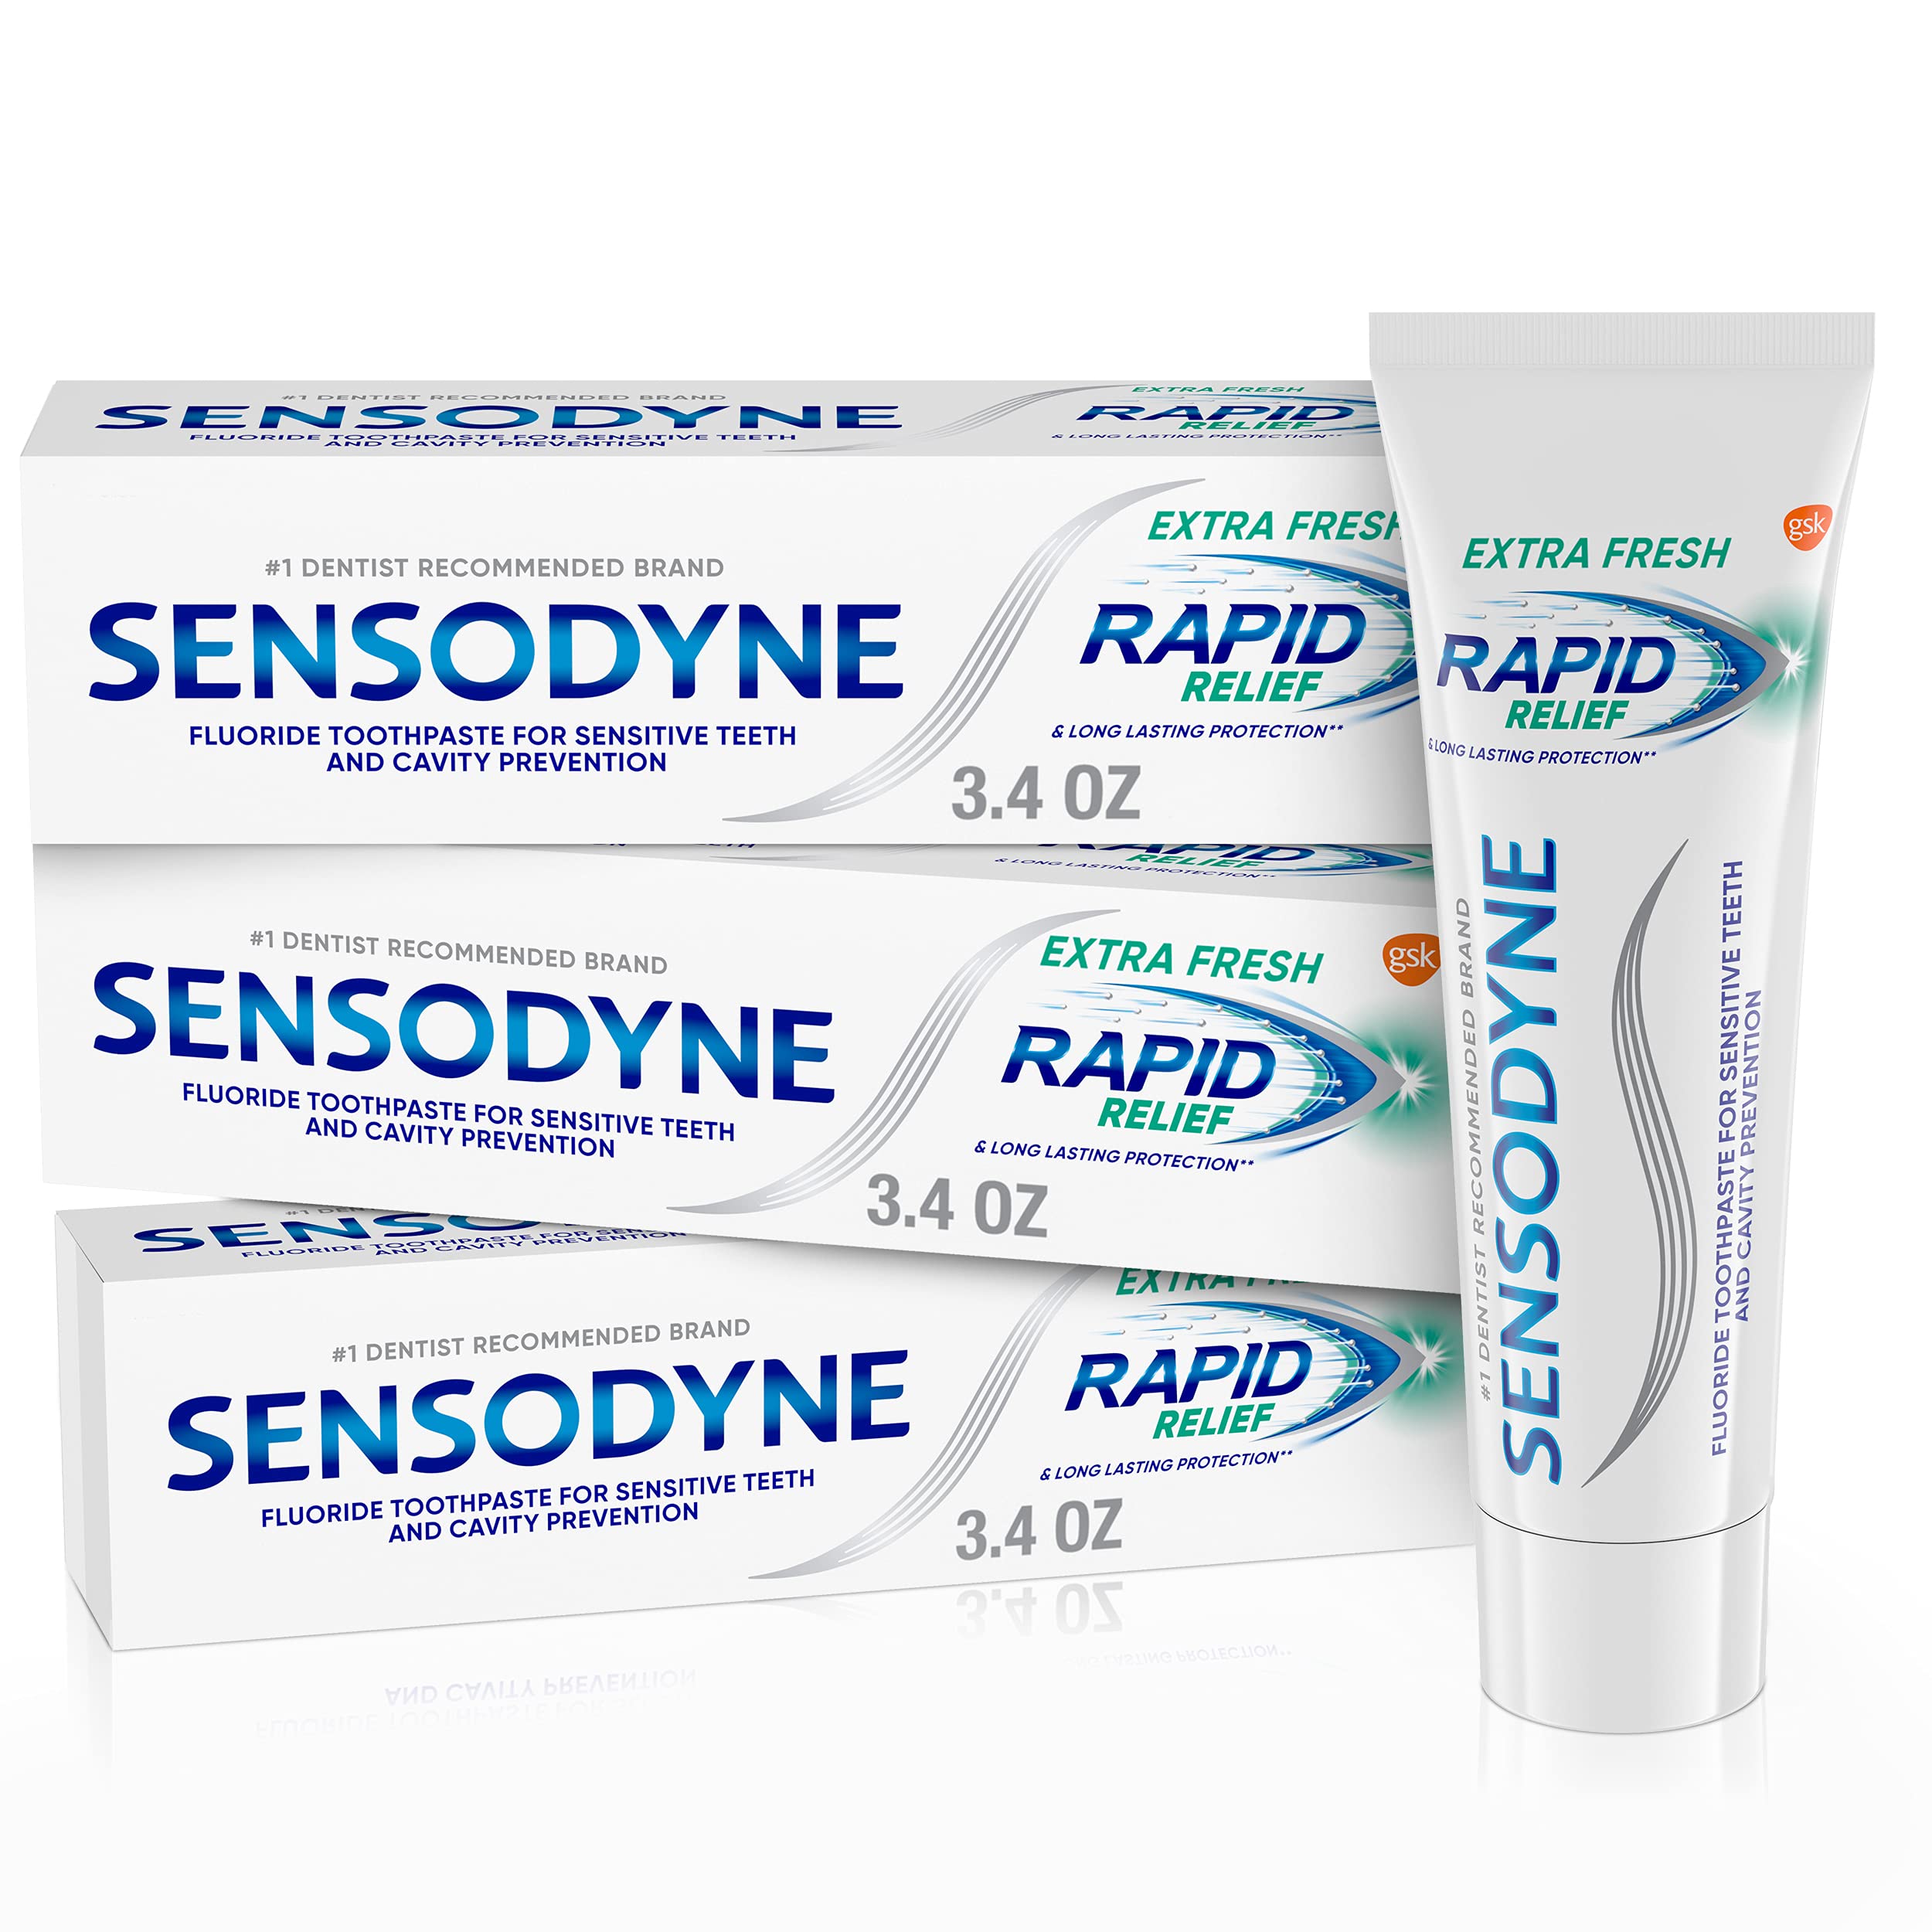 6-Count 3.4-Oz Sensodyne Rapid Relief Sensitive Toothpaste (Extra Fresh) + 7.5-Oz Dial Antibacterial Liquid Hand Soap (Gold) $26.05 w/ S&S + Free shipping